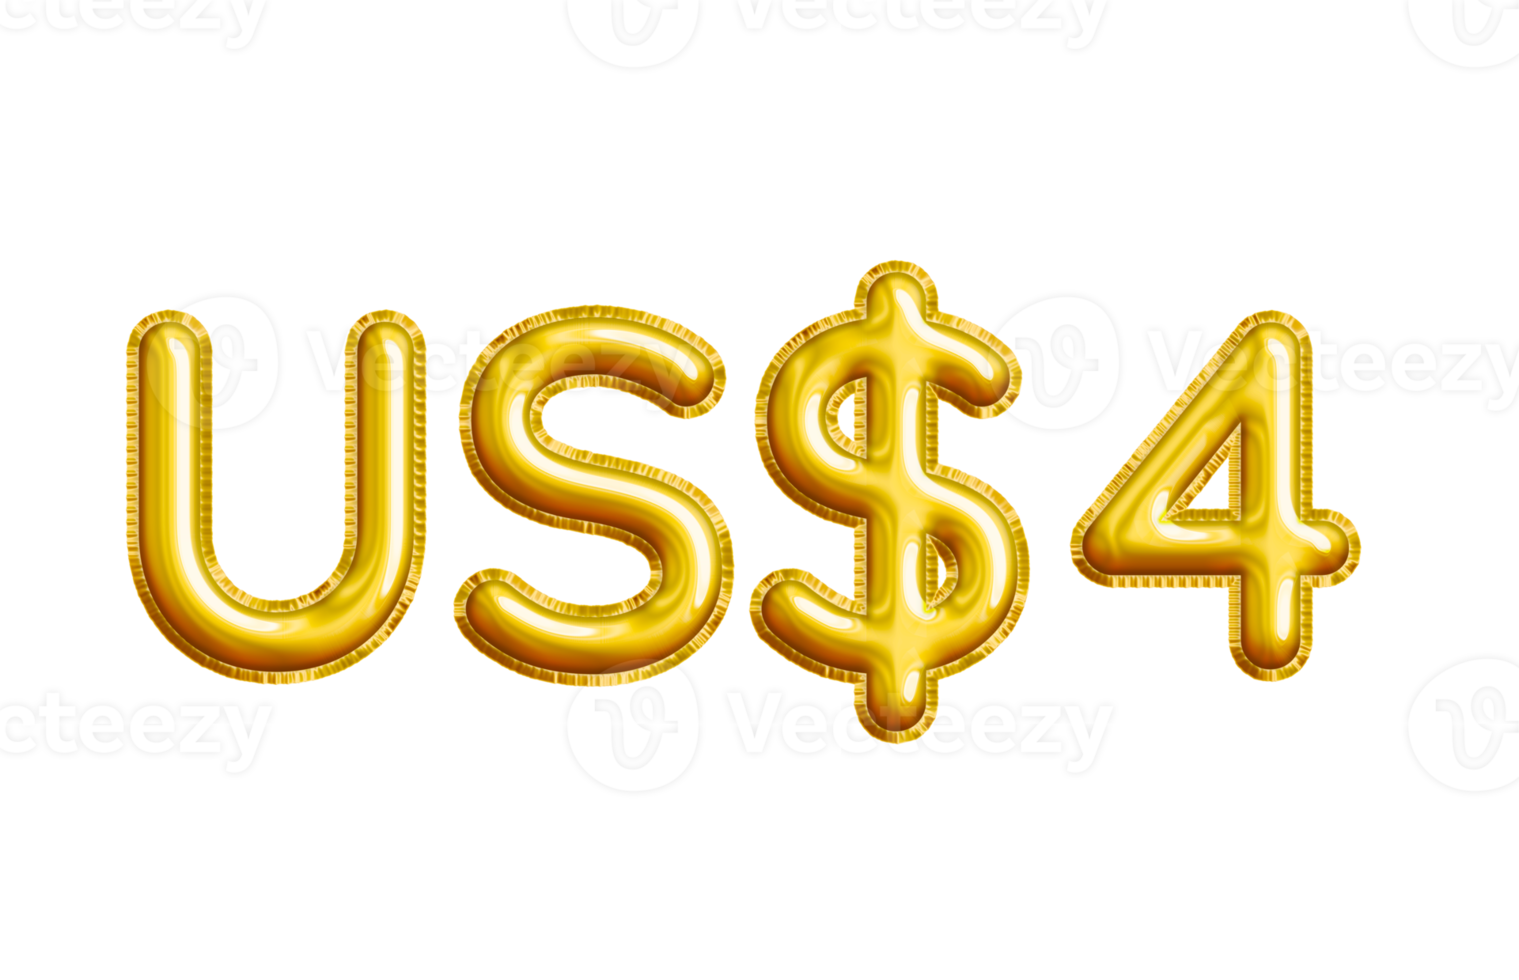 USD or United States Dollar 3D Gold Balloon. You can use this asset for your content like as USD Currency, Flyer Marketing, Banner, Promotion, Advertising, Discount Card, Pamphlet and anymore. png